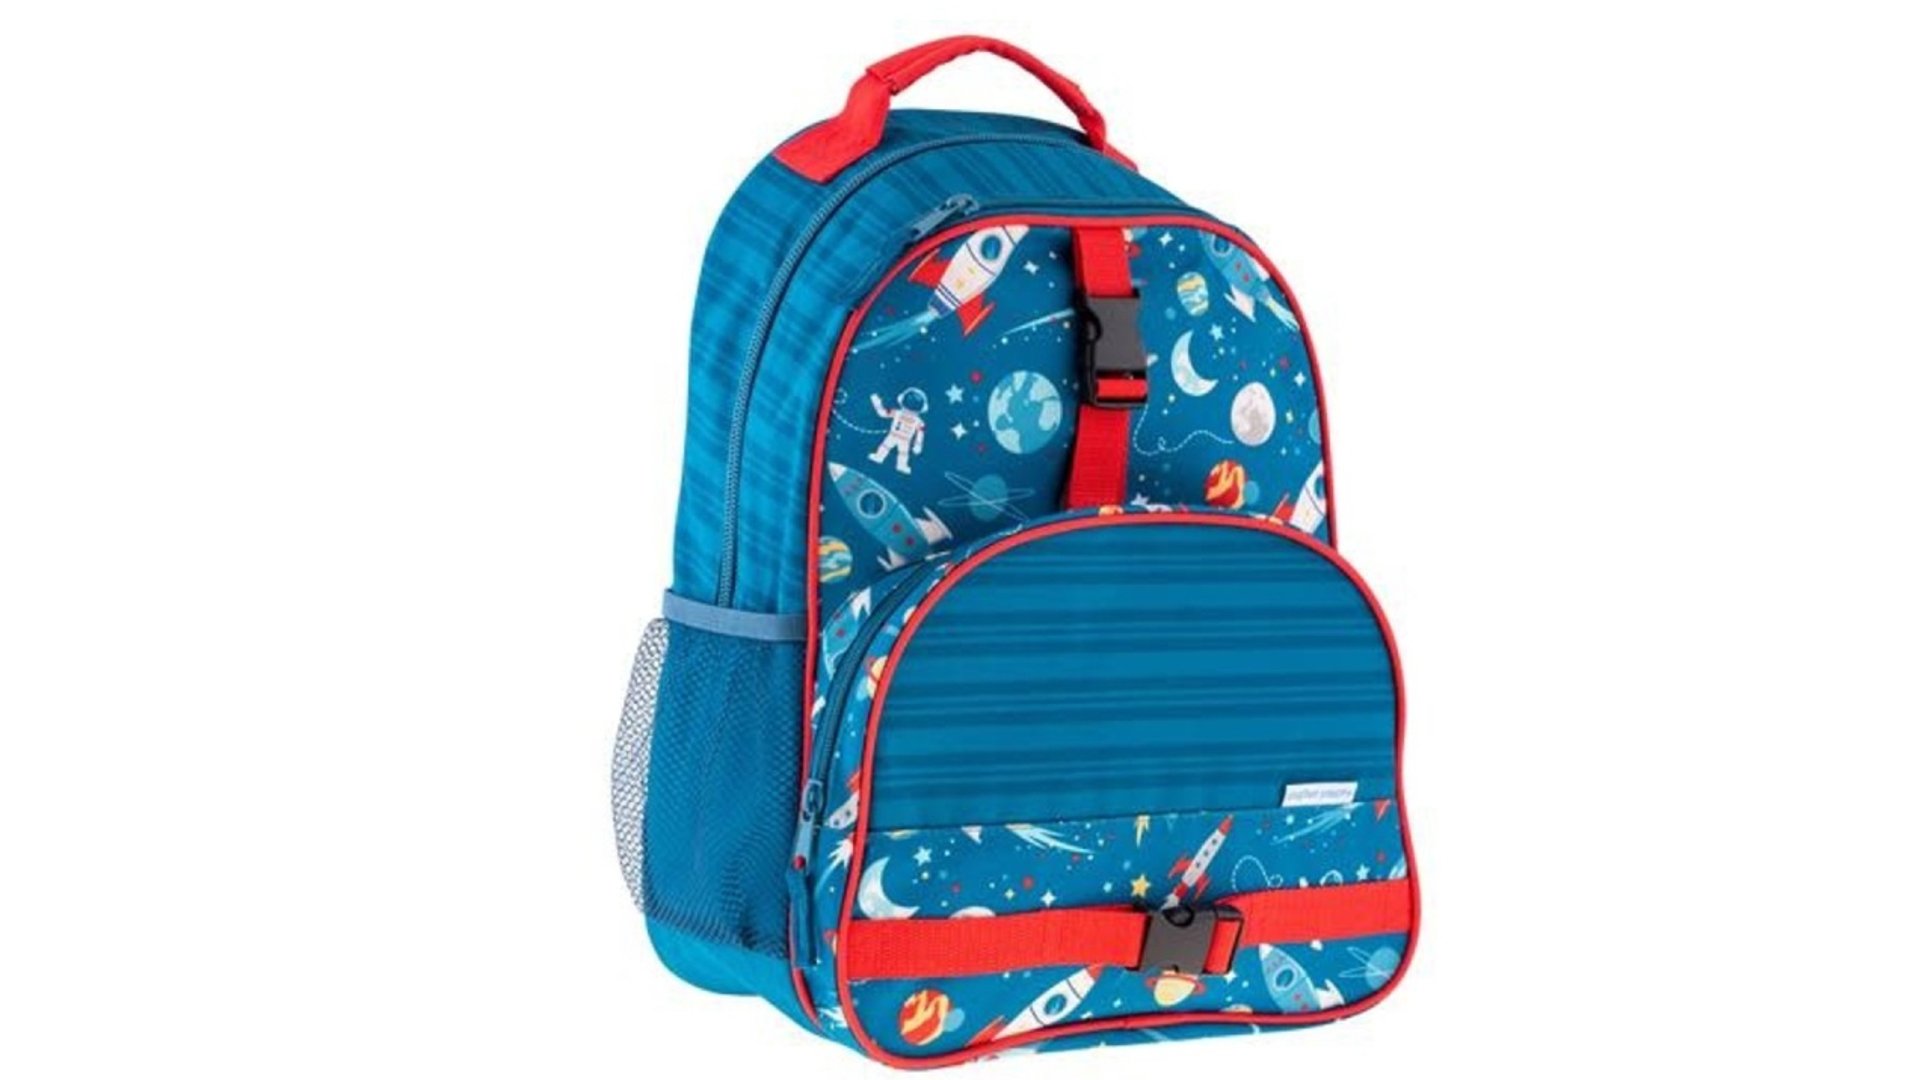 Blue backpack with red accents and space motif